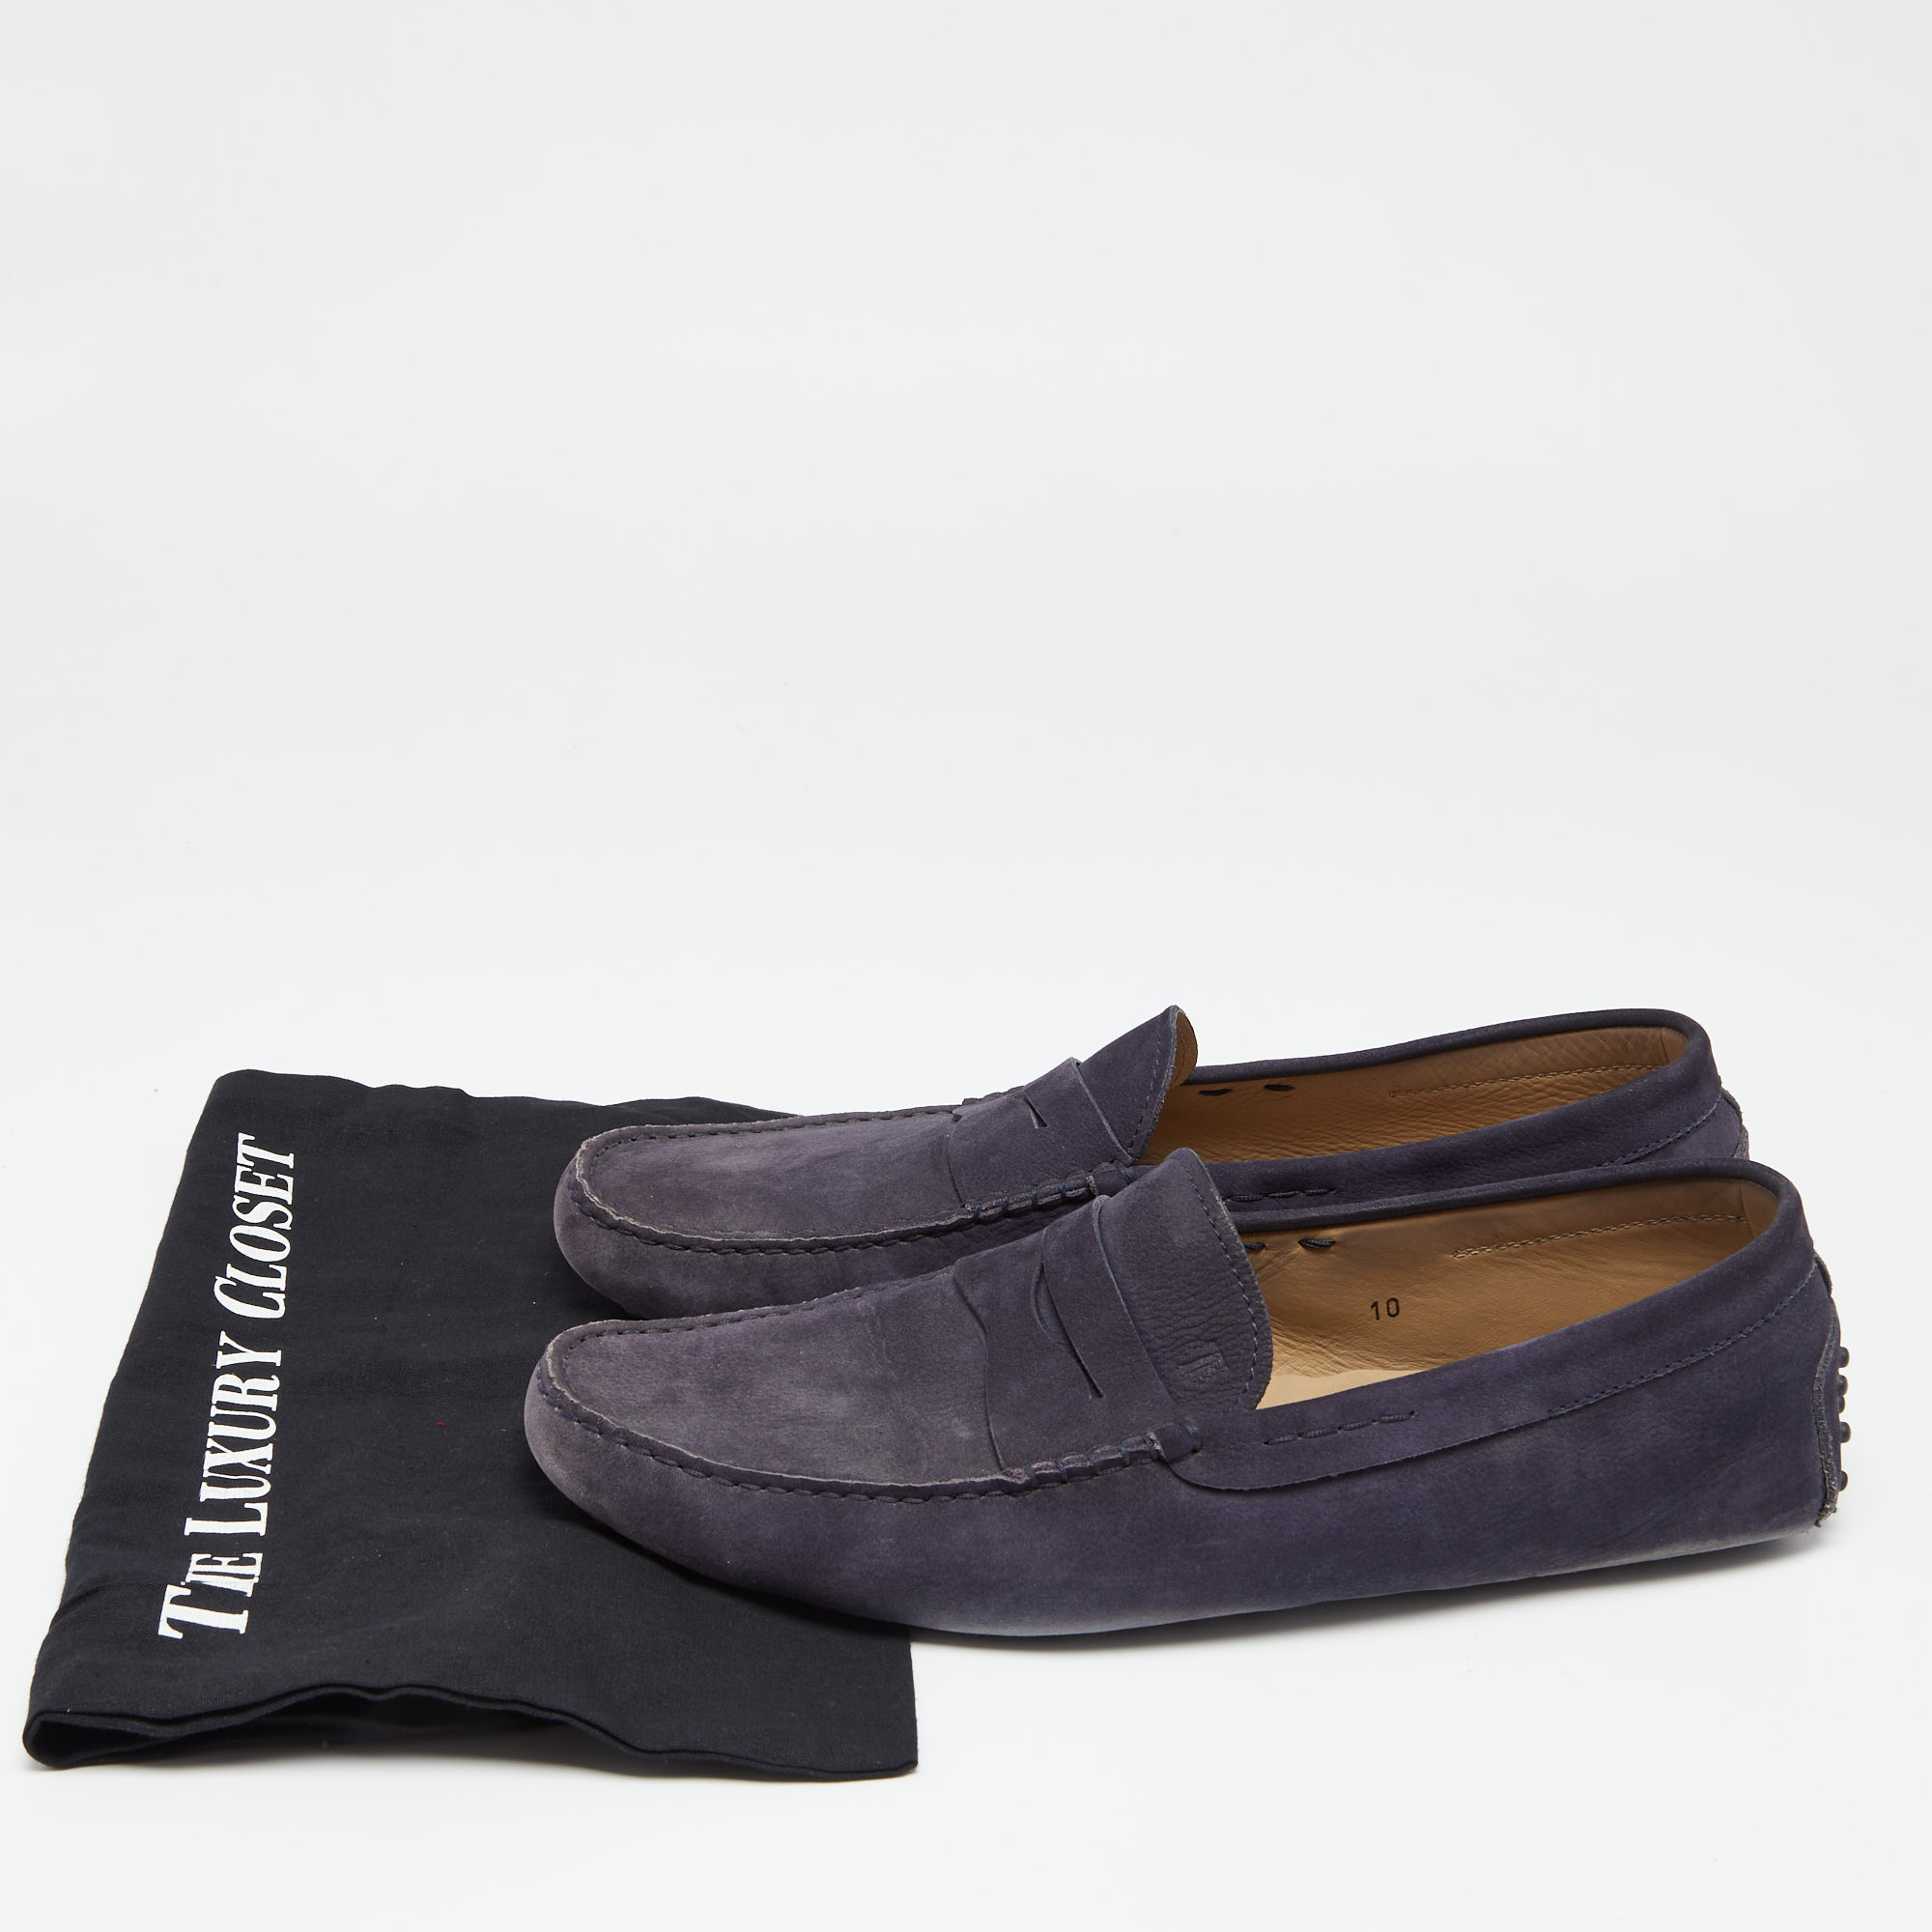 Tod's Purple Suede Slip On Loafers Size 44.5